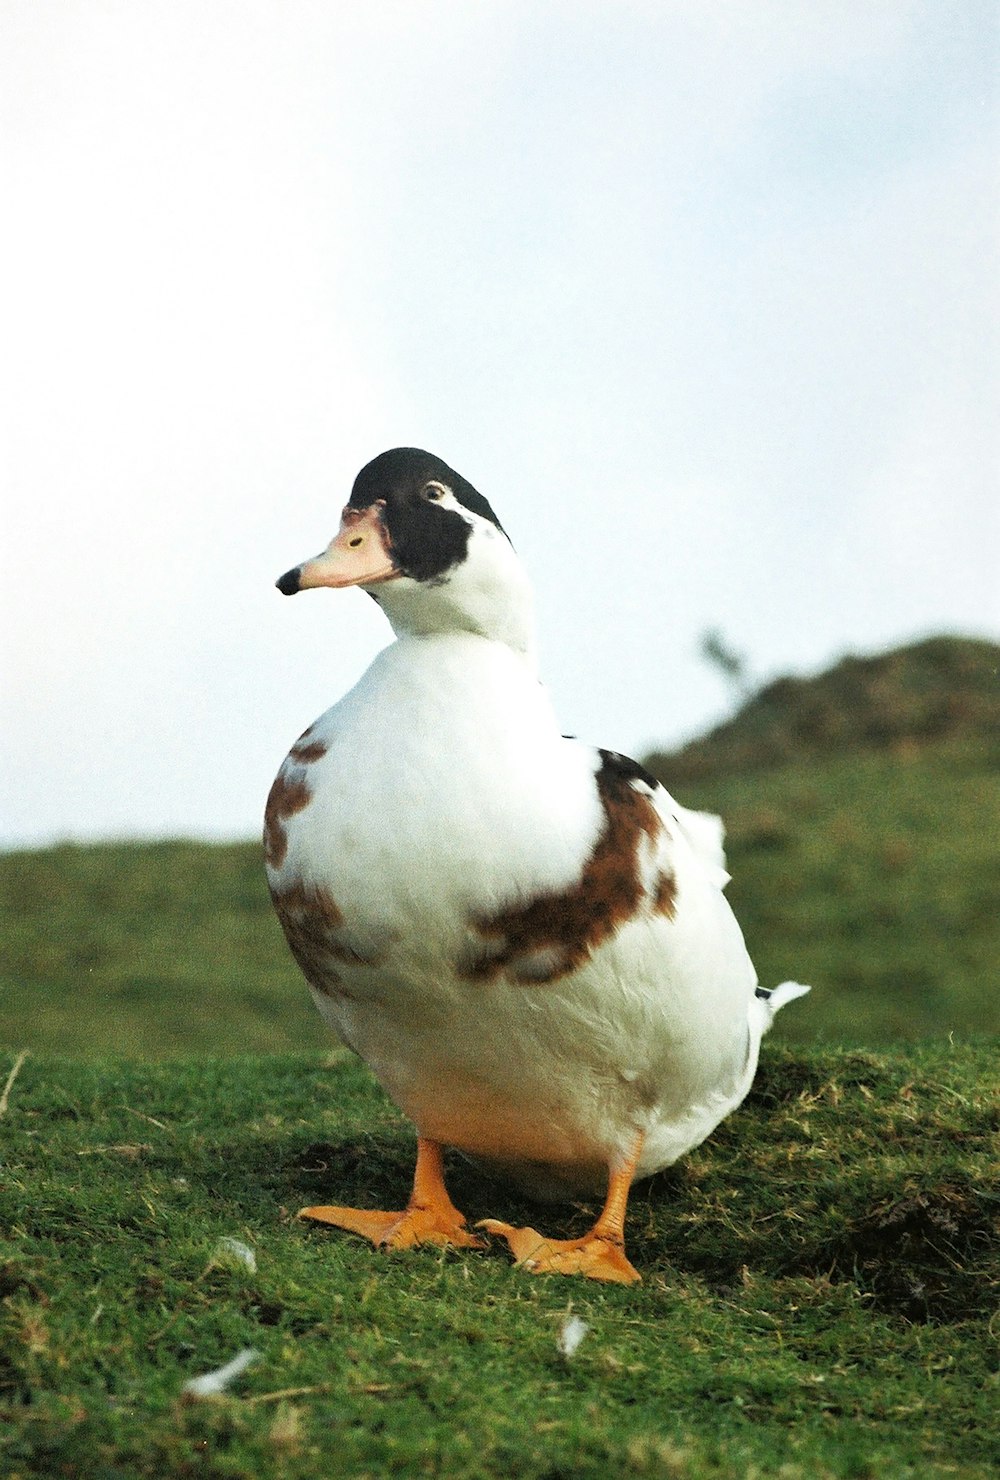 a duck is standing on a grassy hill